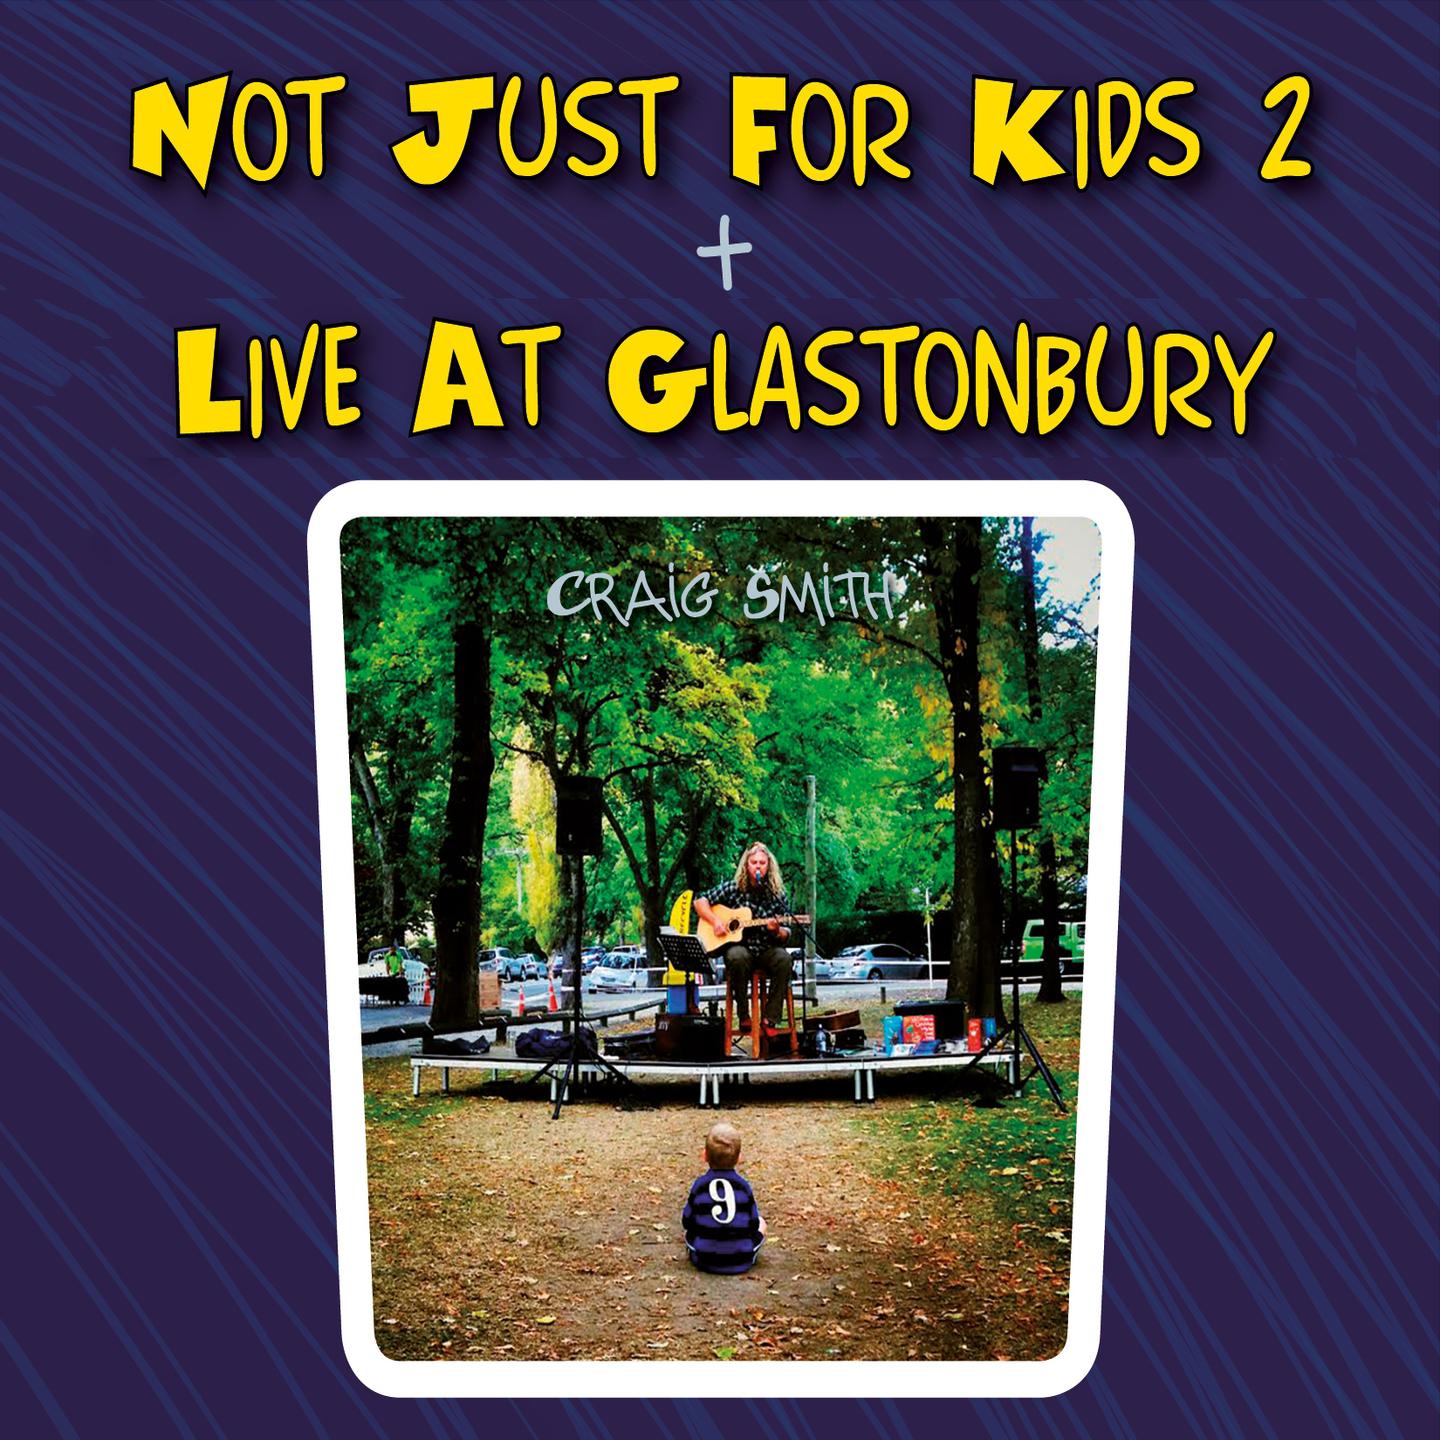 Not Just for Kids 2 + Live at Glastonbury